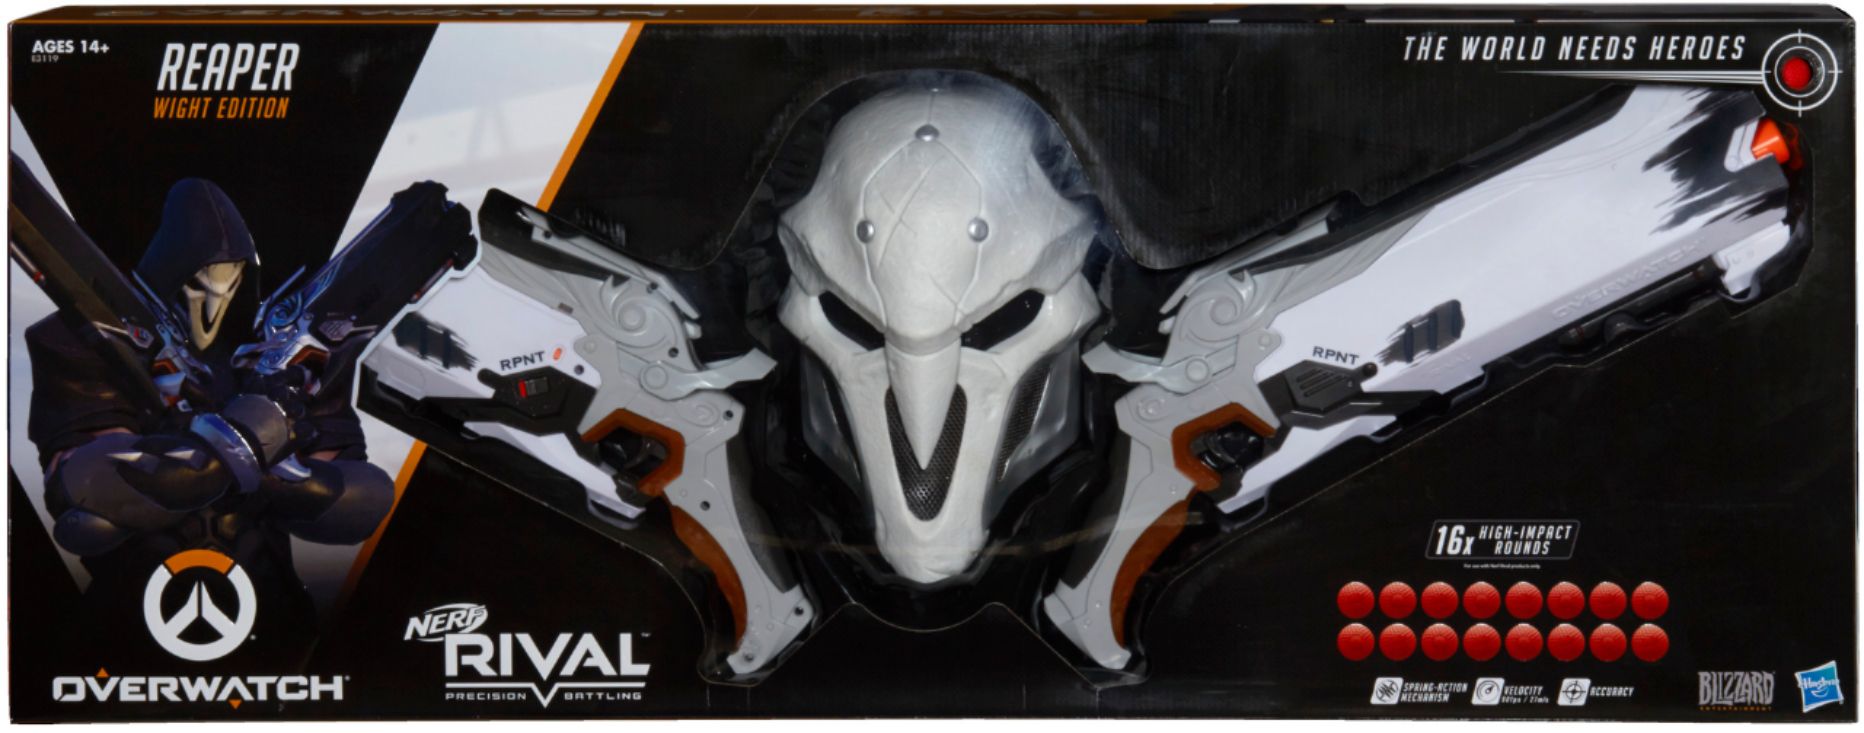 Wight Edition Details about   Nerf Rival Overwatch Reaper Collector Pack Limited Costume 